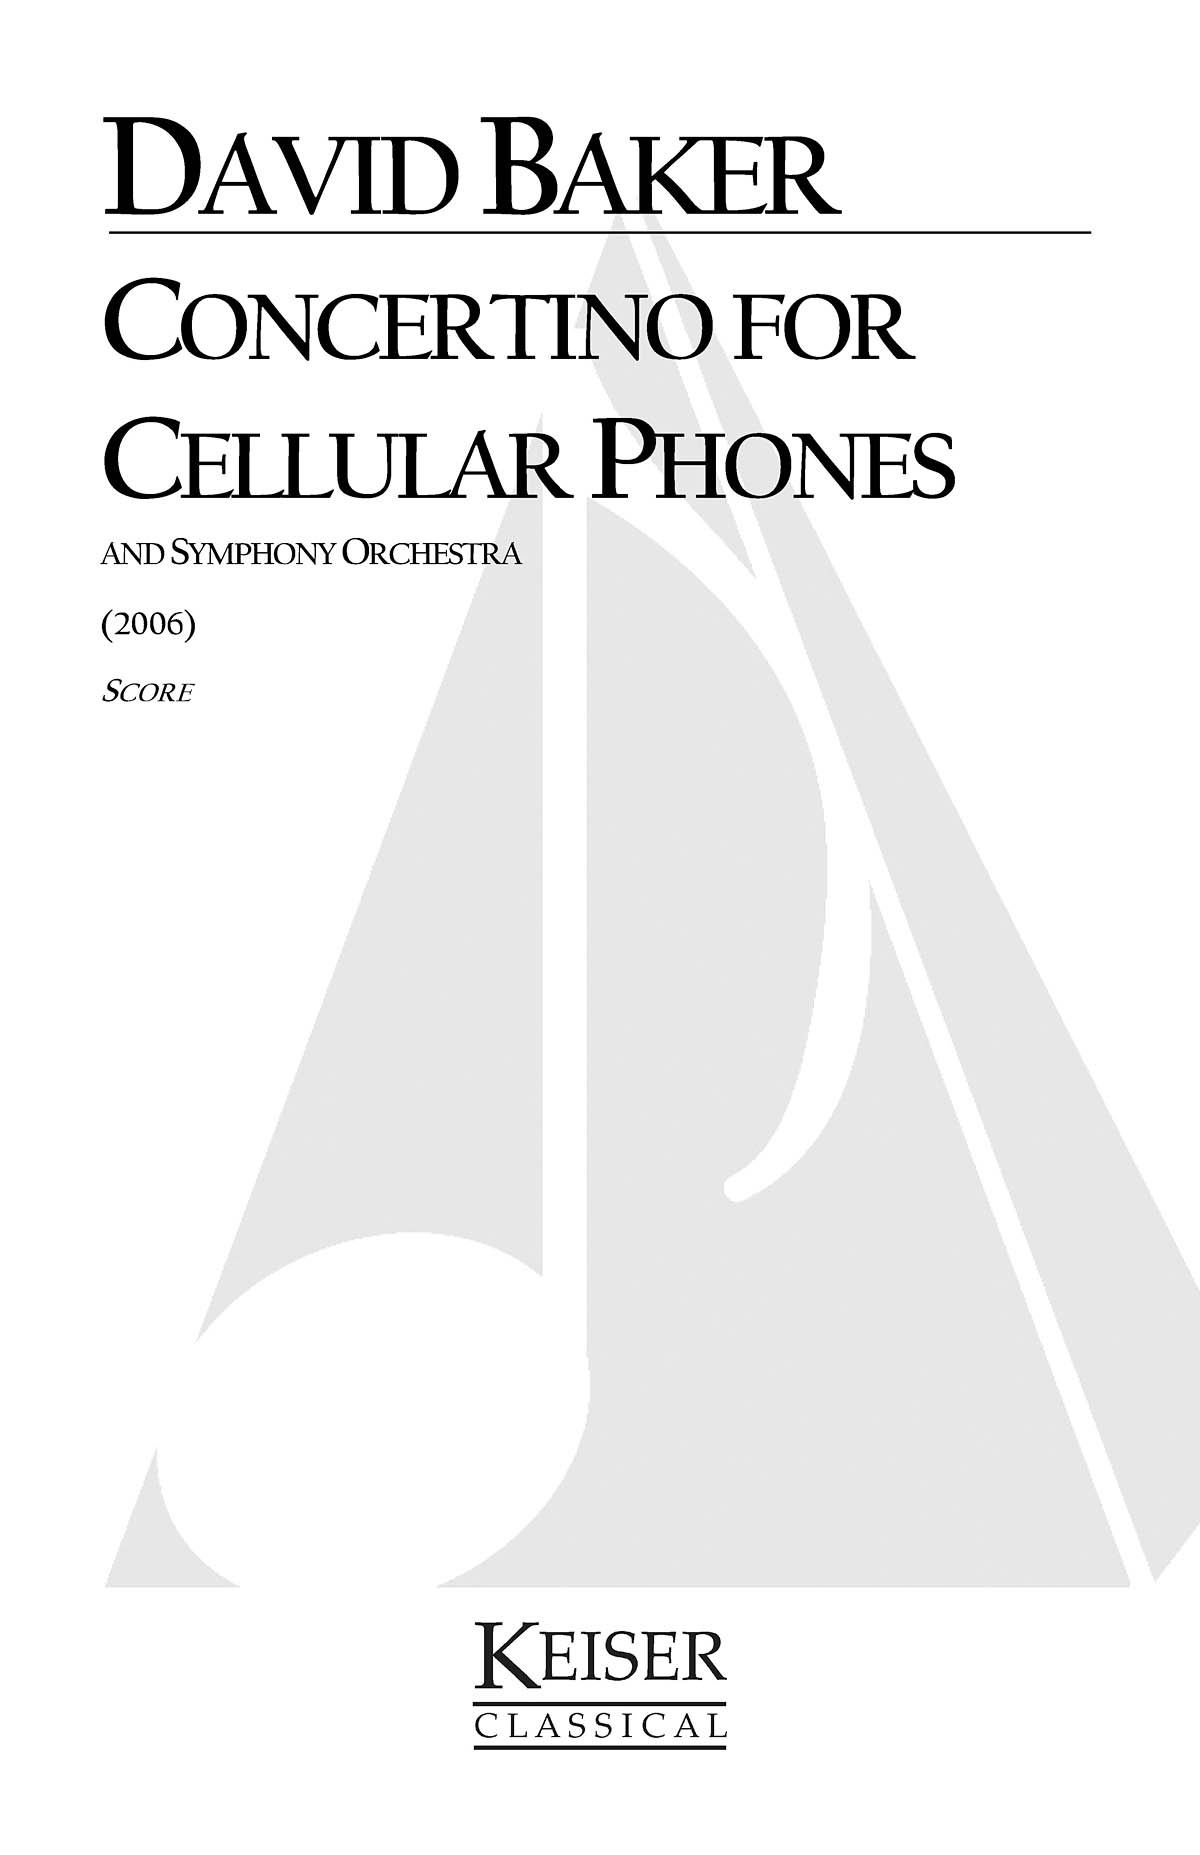 Concertino for Cellular Phones and Symphony Orch.